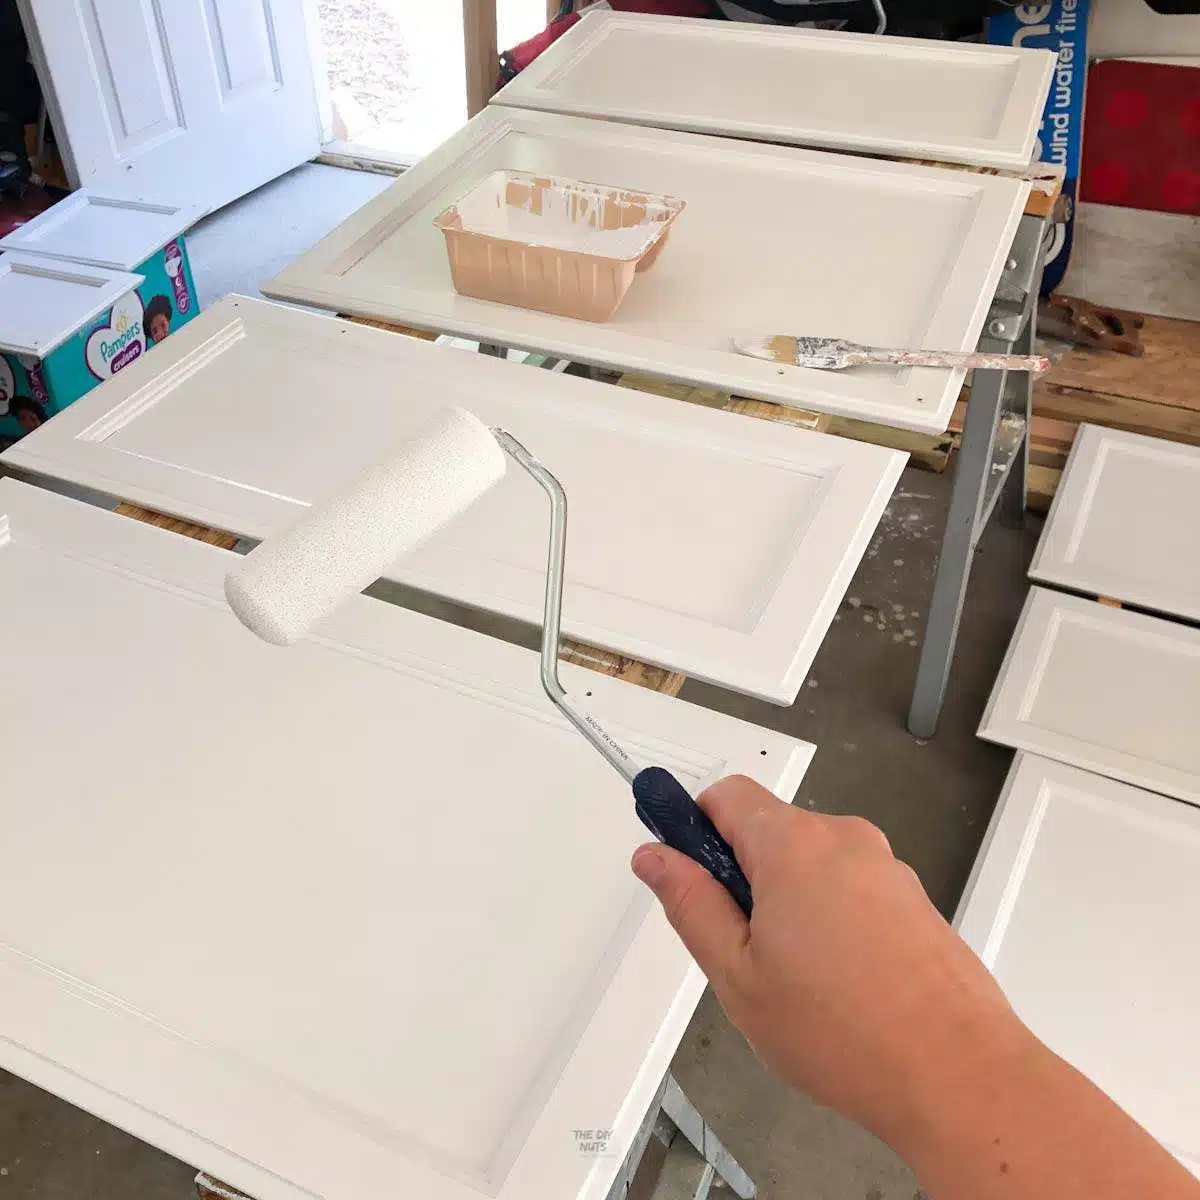 hand holding small roller with cabinet doors on sawhorses and white paint and brush.